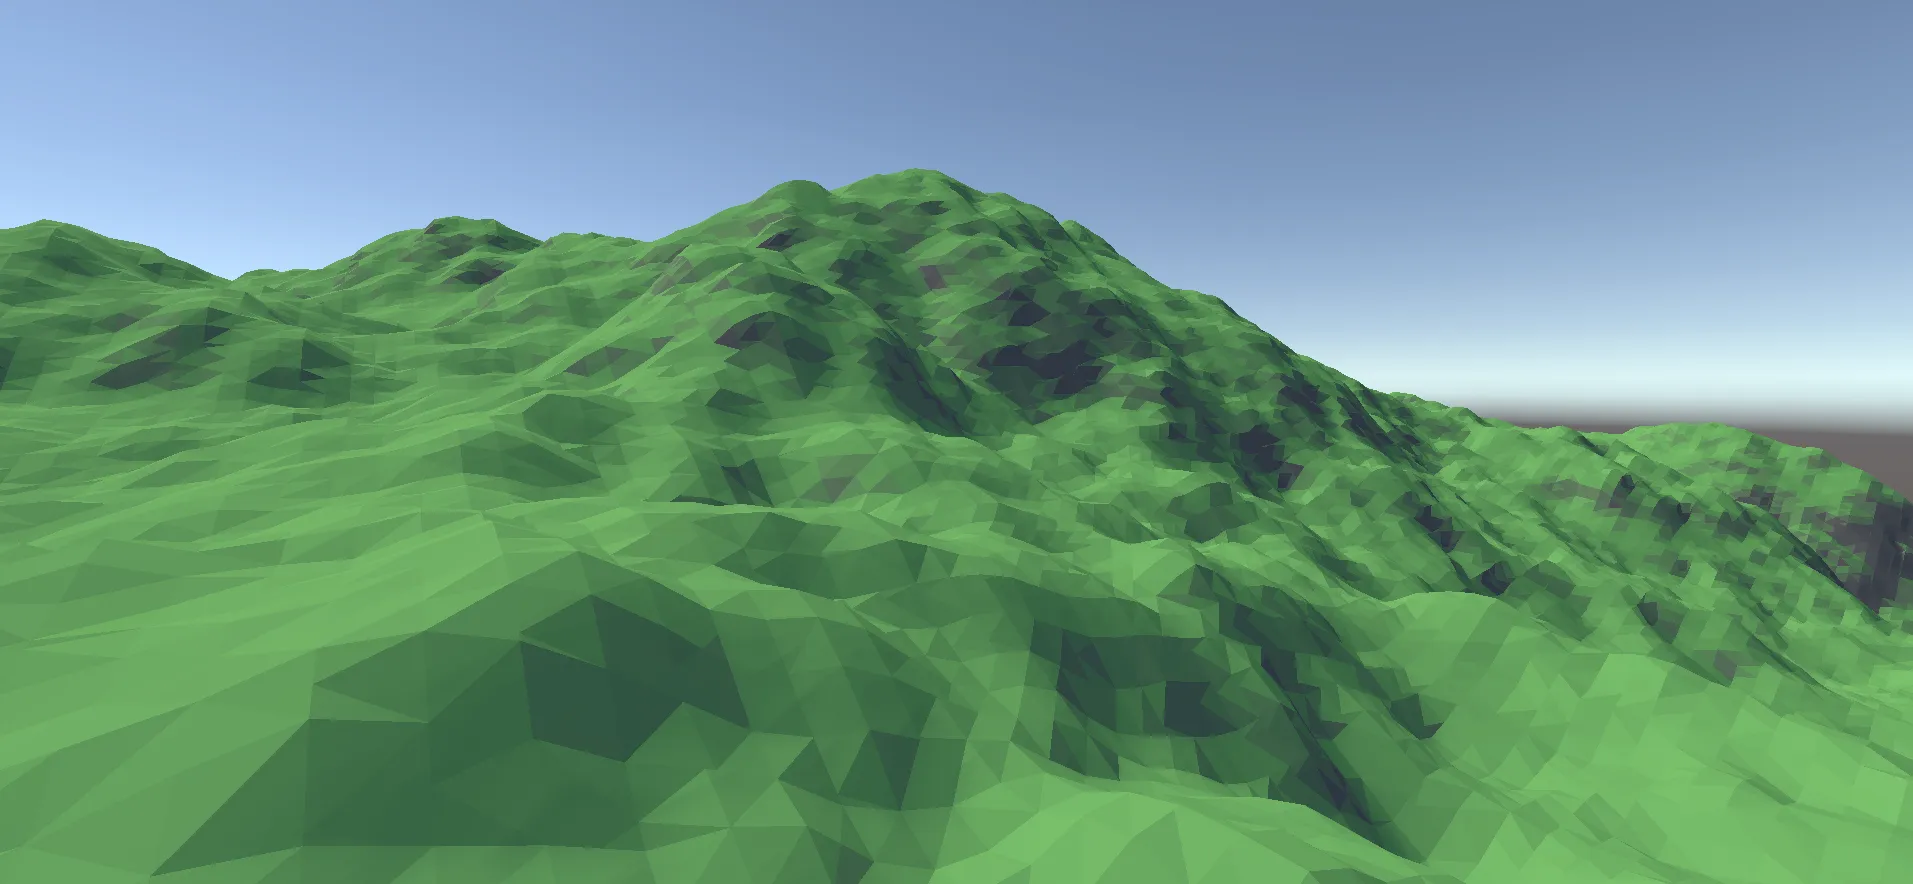 Green, polygonal terrain generated with the Marching Cubes algorithm